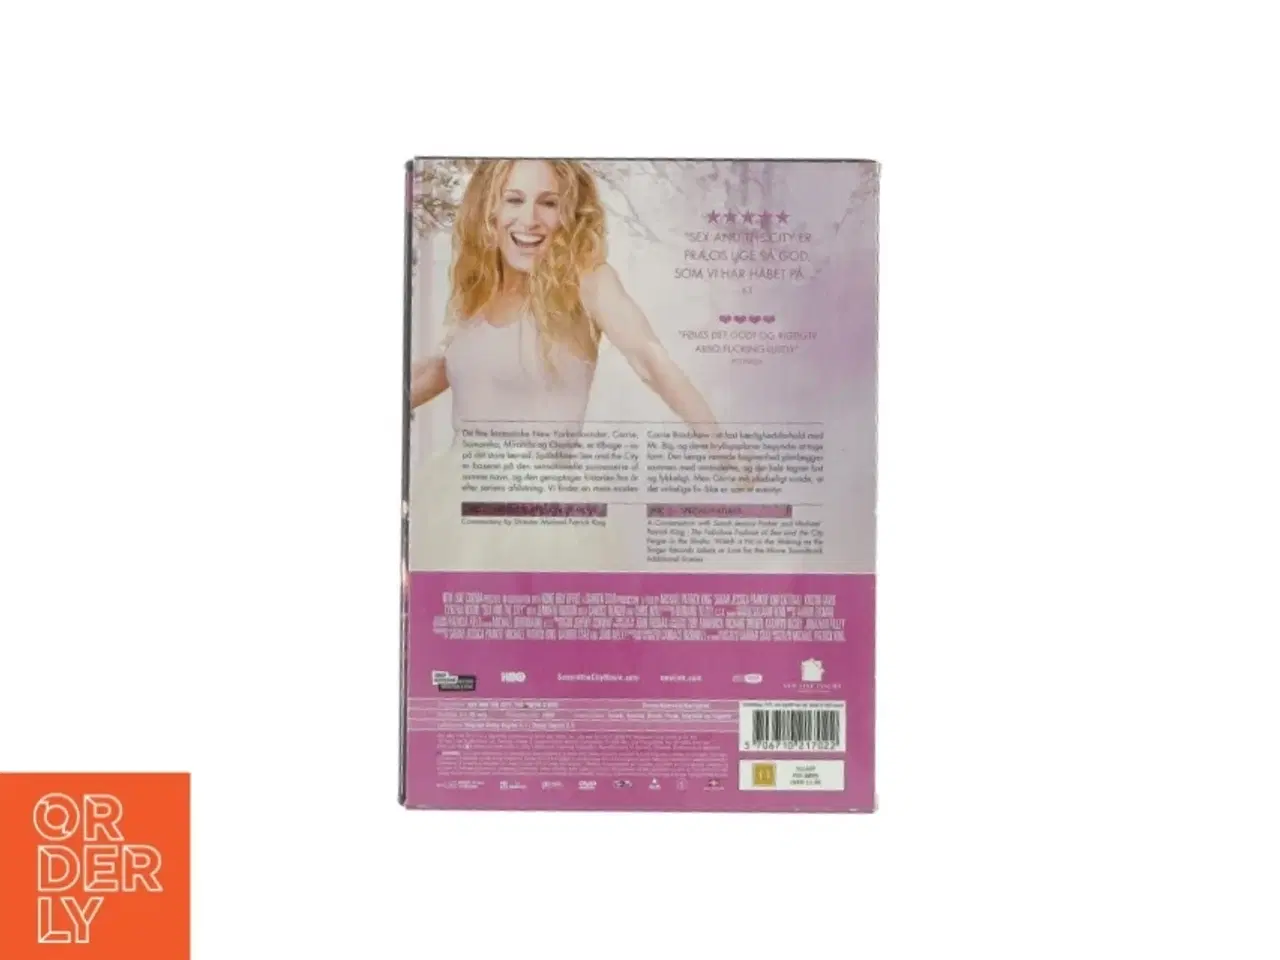 Billede 2 - Sex and the city - The movie (DVD)